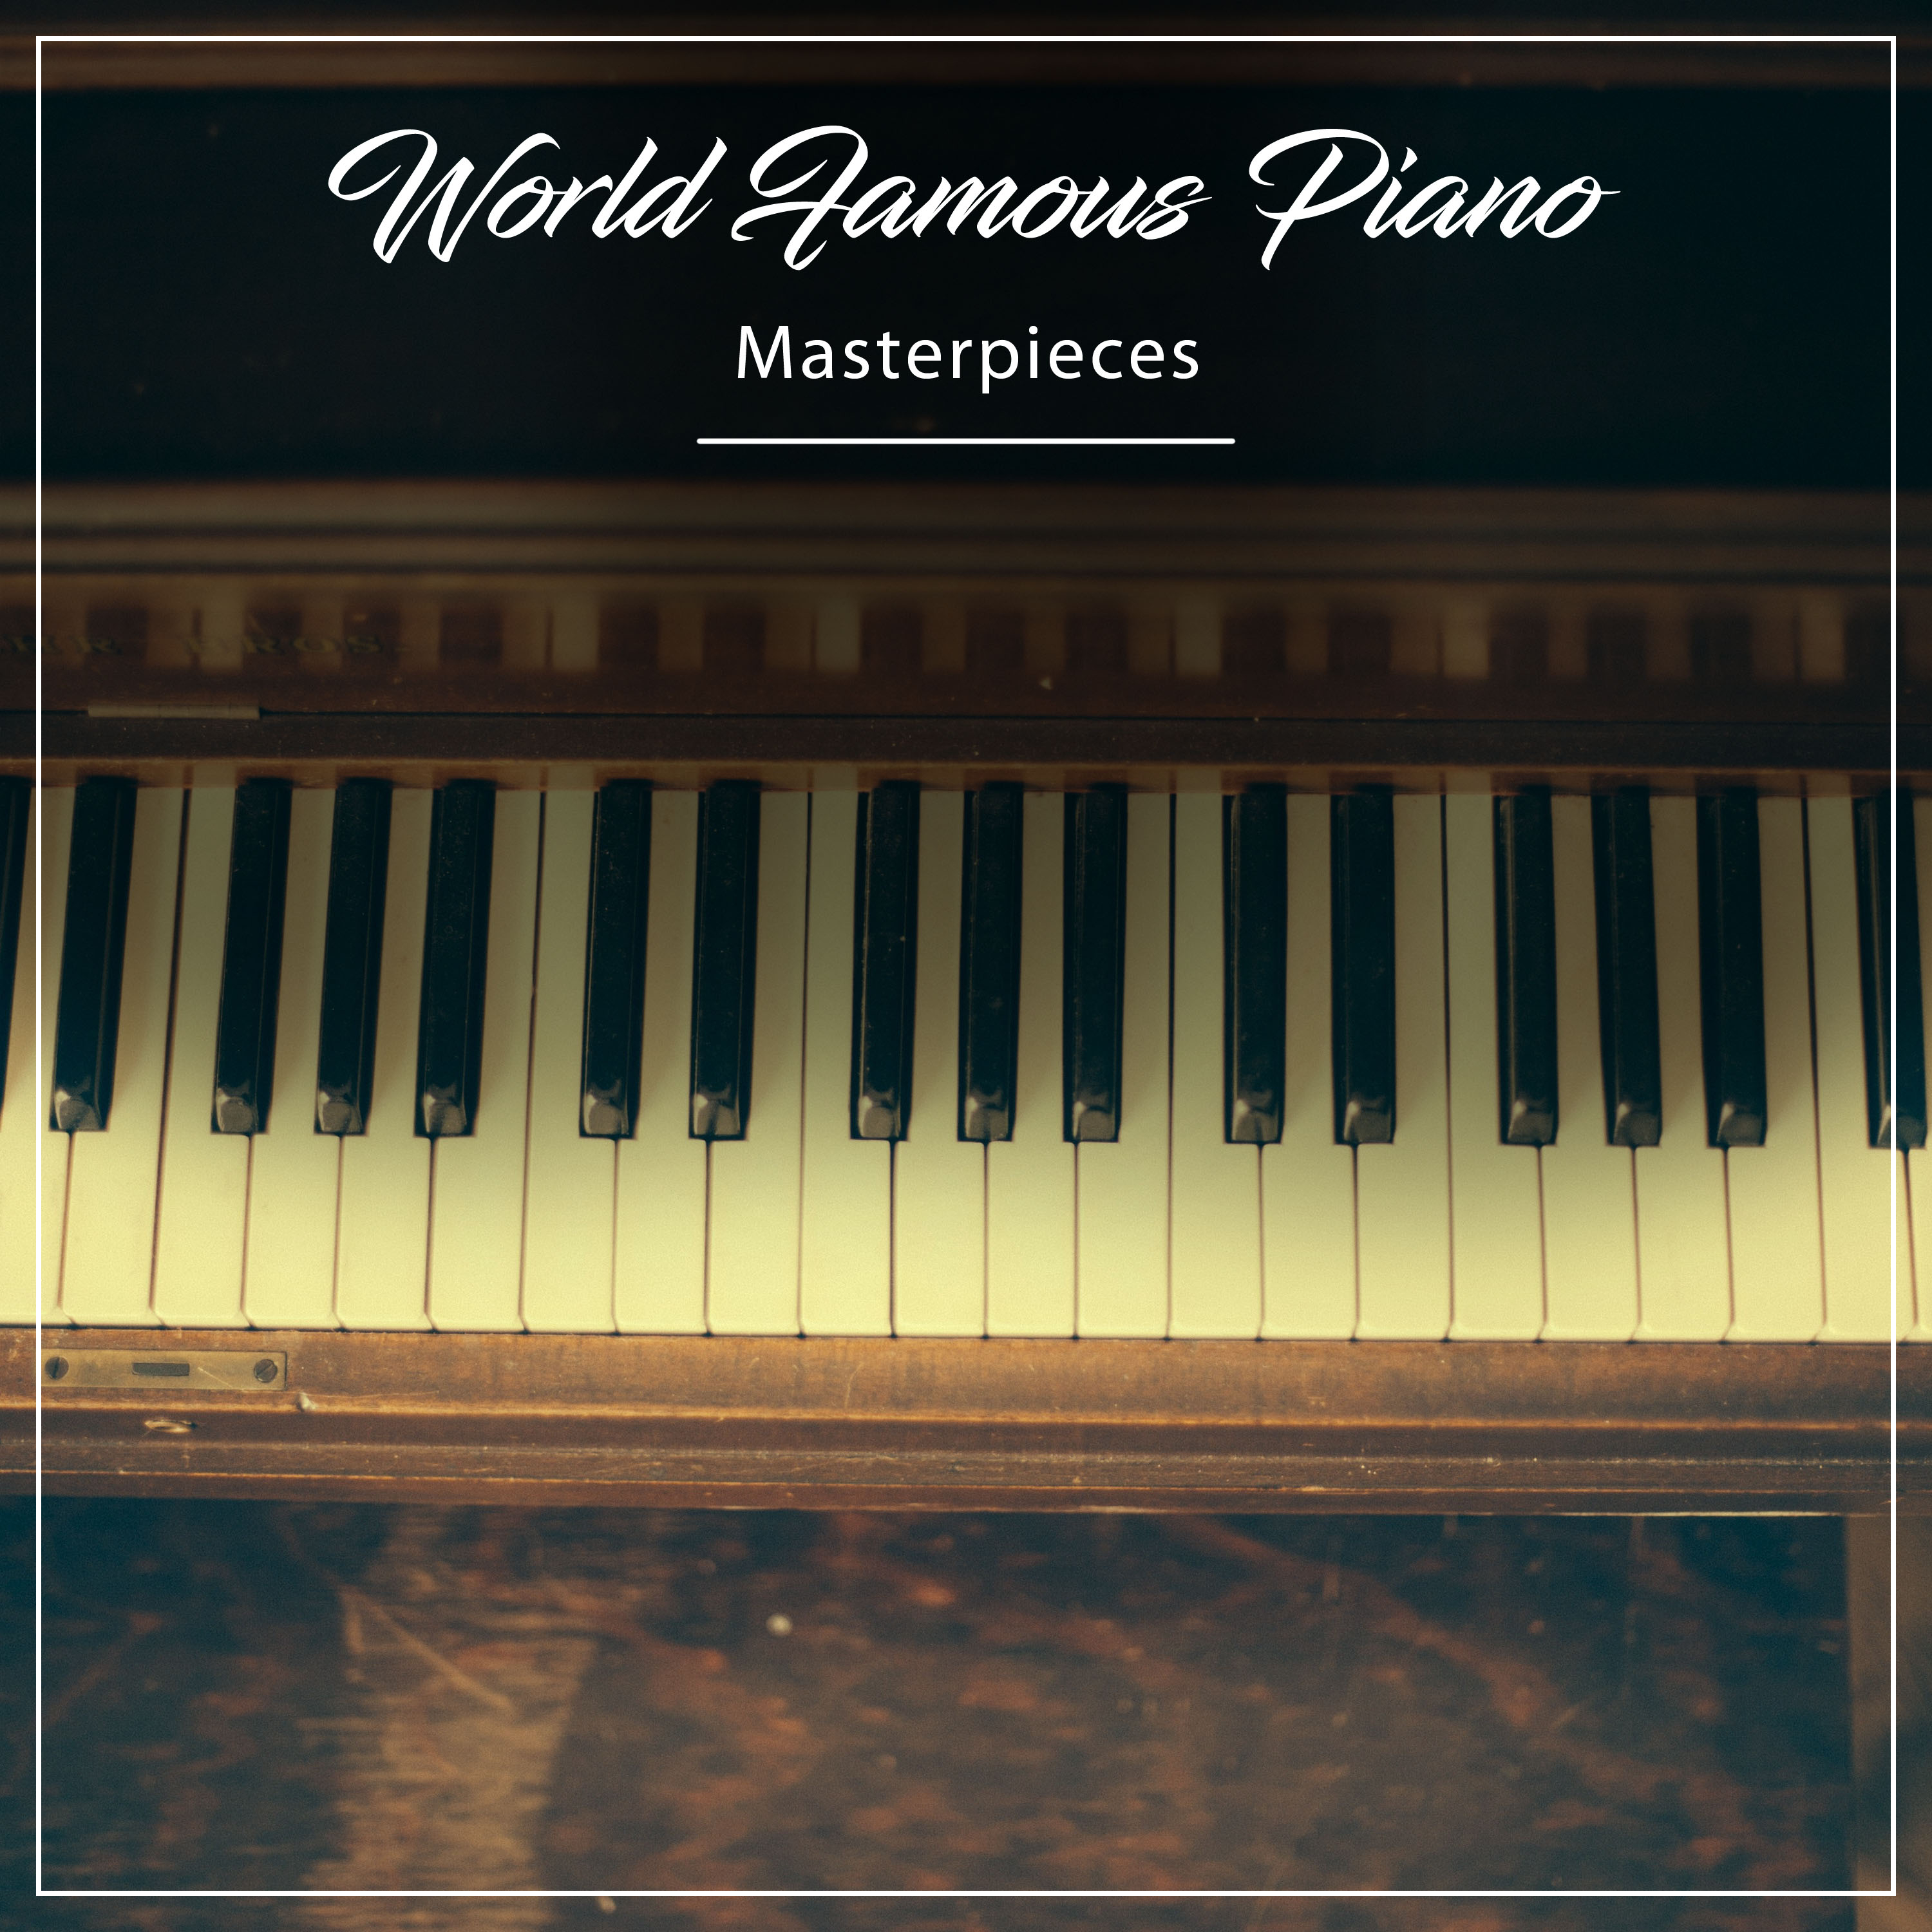 19 World Famous Piano Masterpieces for Restaurants